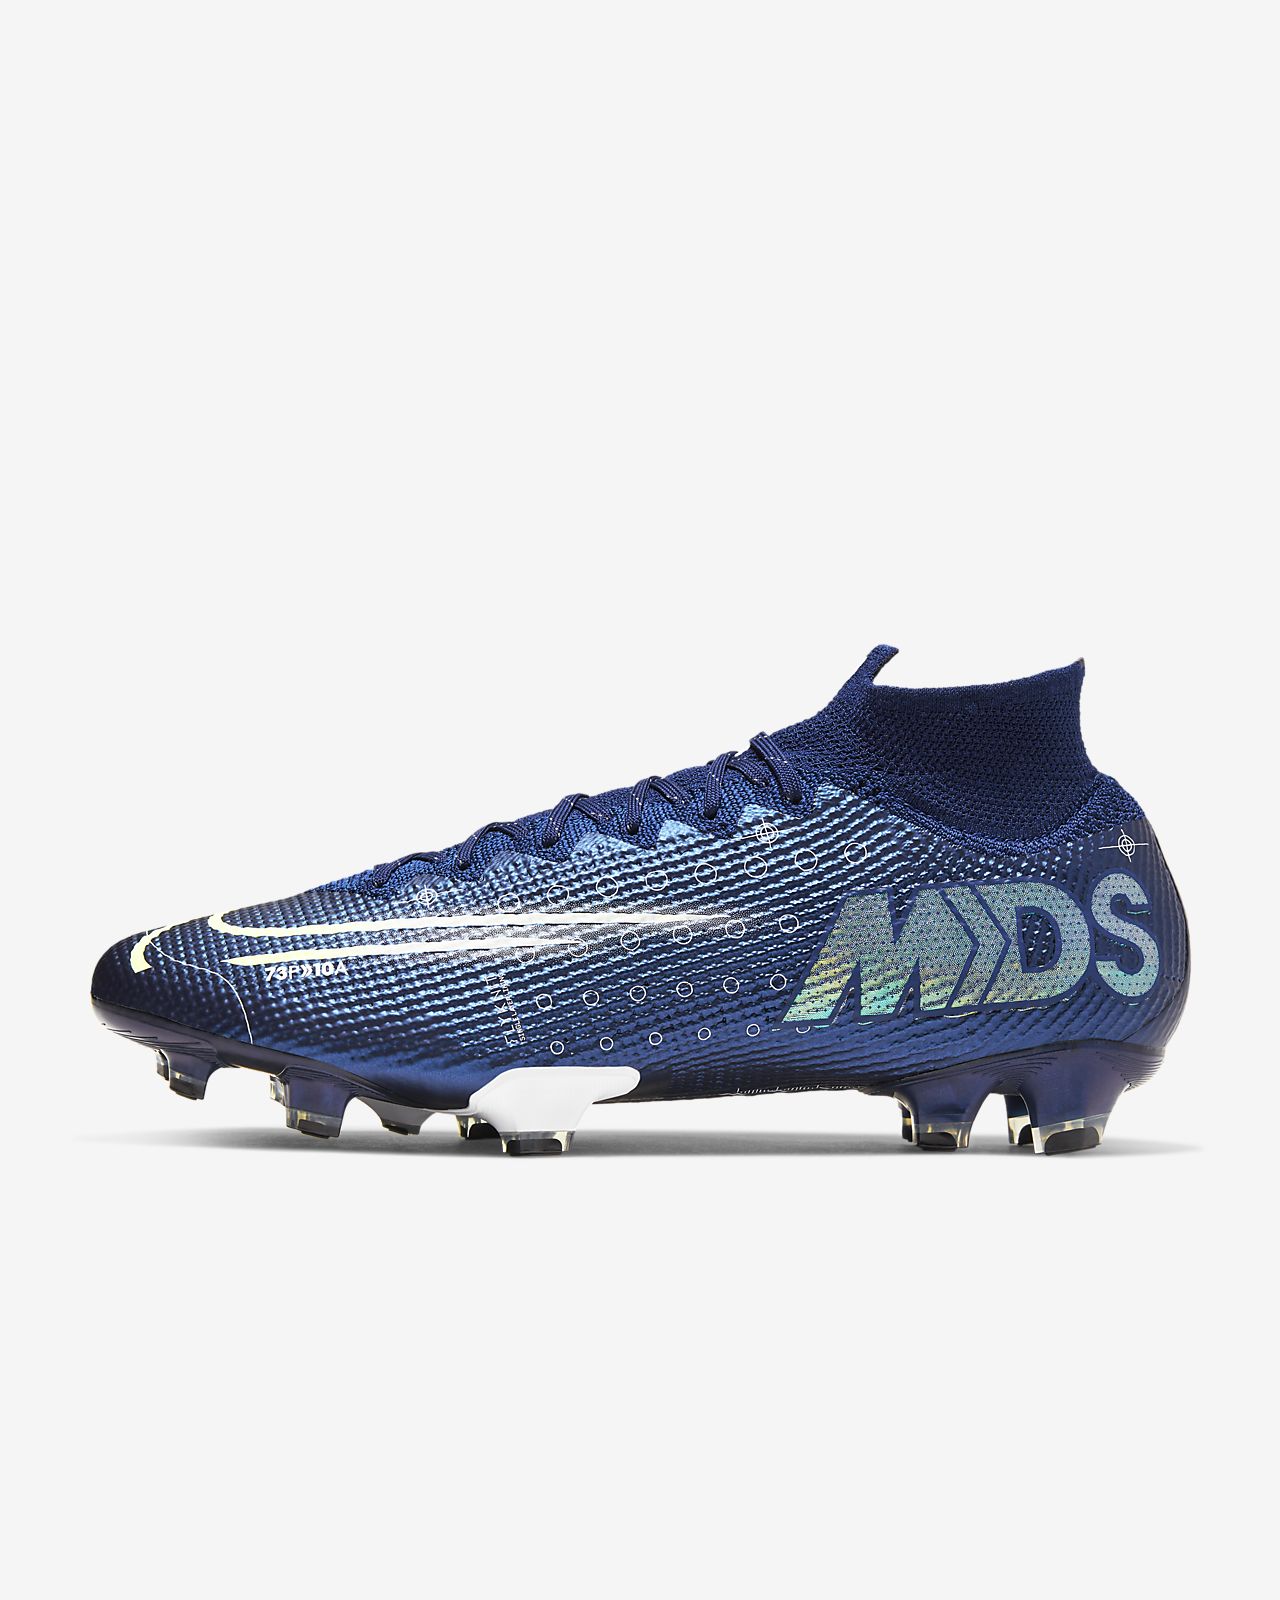 nike mercurial superfly boots